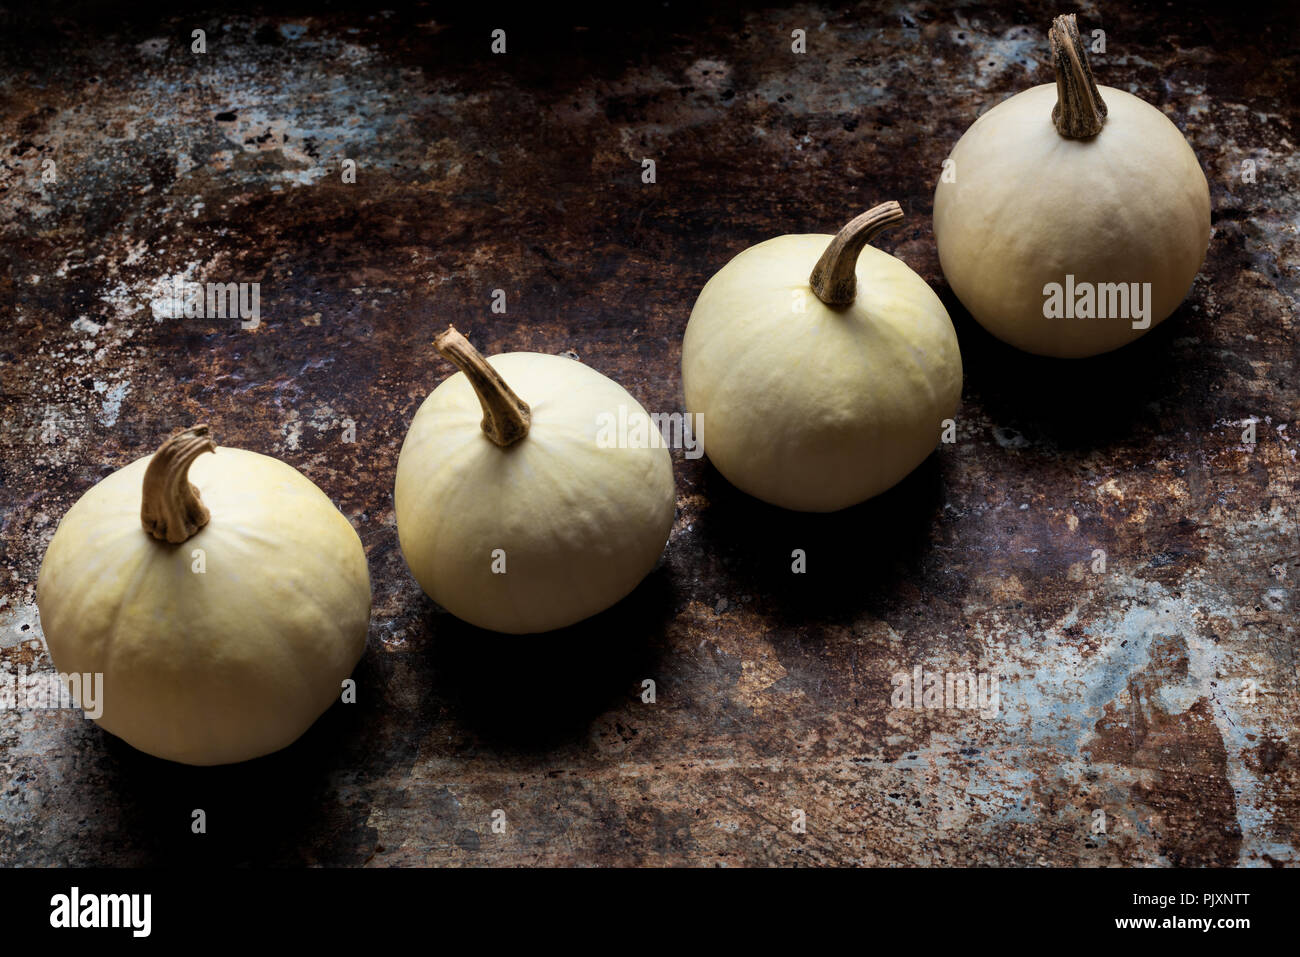 Happy Thanksgiving Banner. Three white pumpkins on rustic metal background with copy space. Autumn Harvest and Holiday minimal still life. Stock Photo